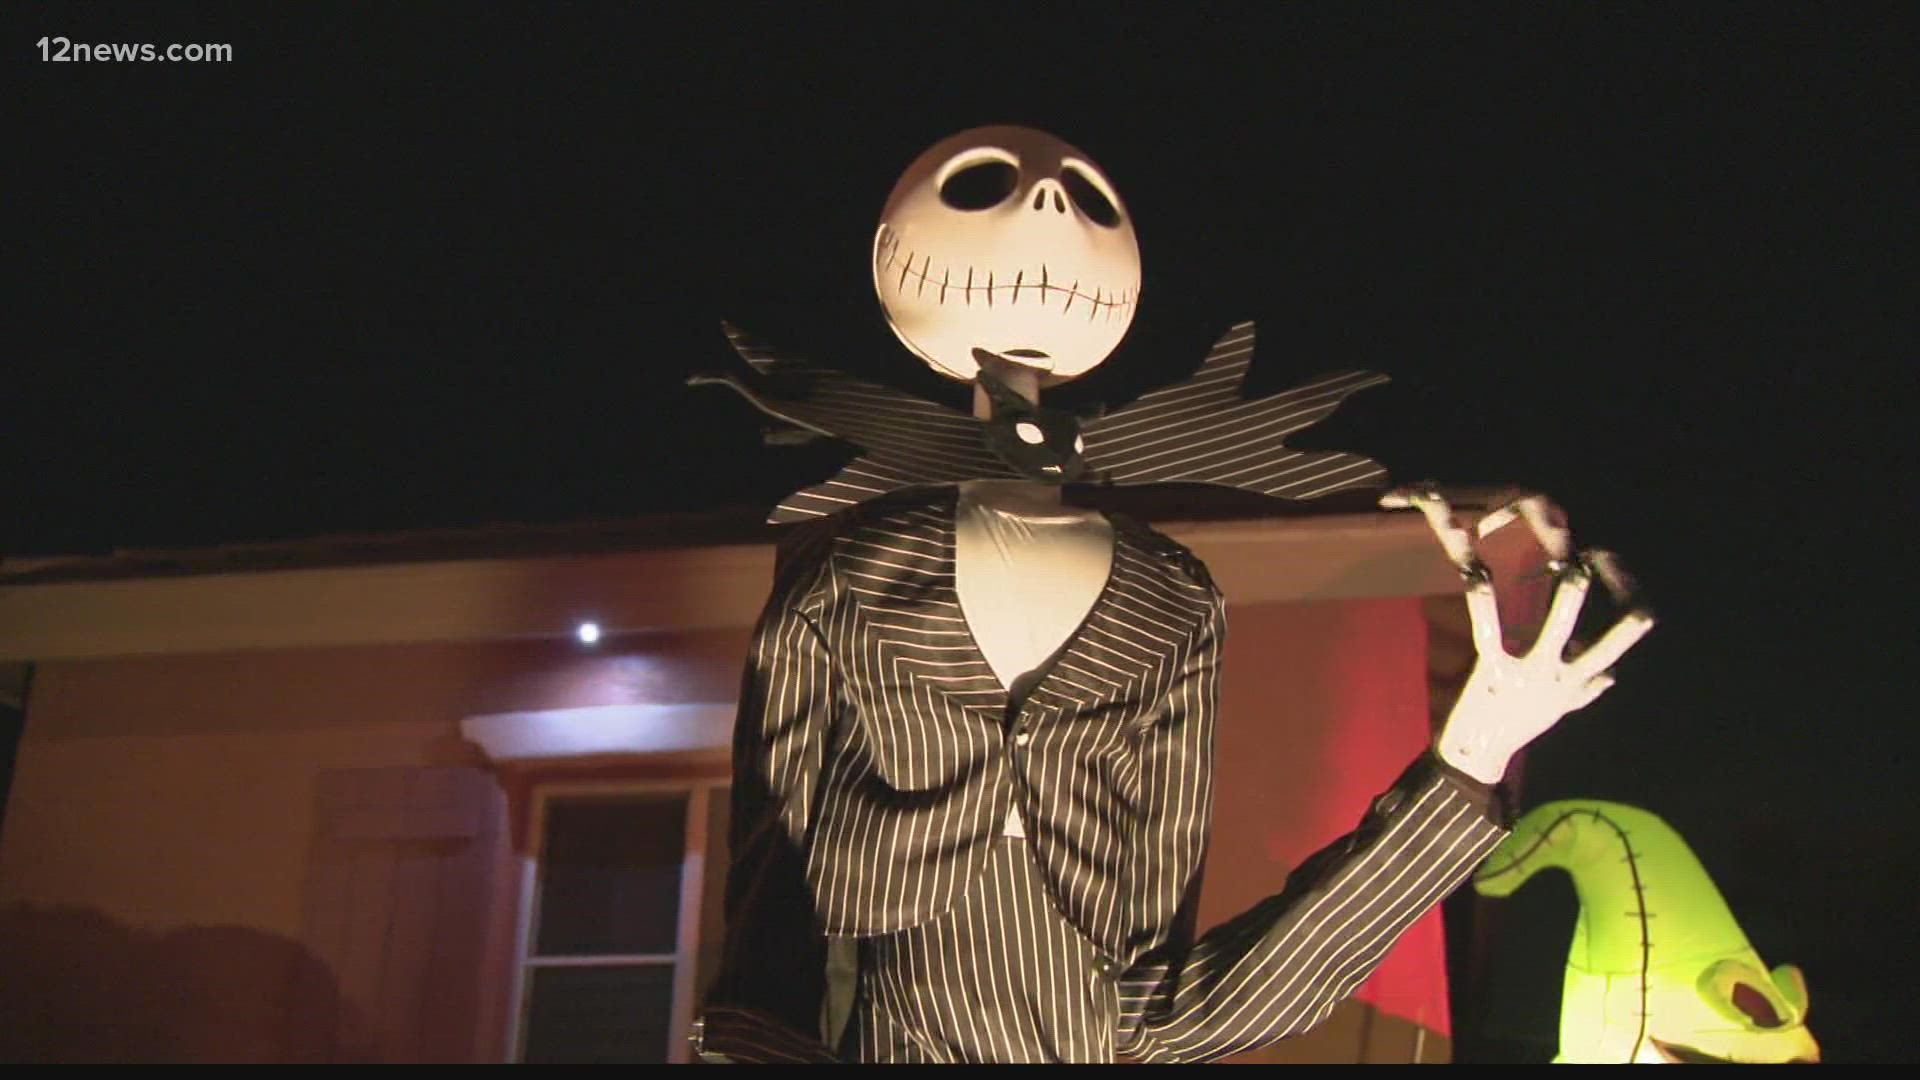 A Chandler resident has already gotten into the Halloween spirit by decorating their home with plenty of spooky homages to "The Nightmare Before Christmas."